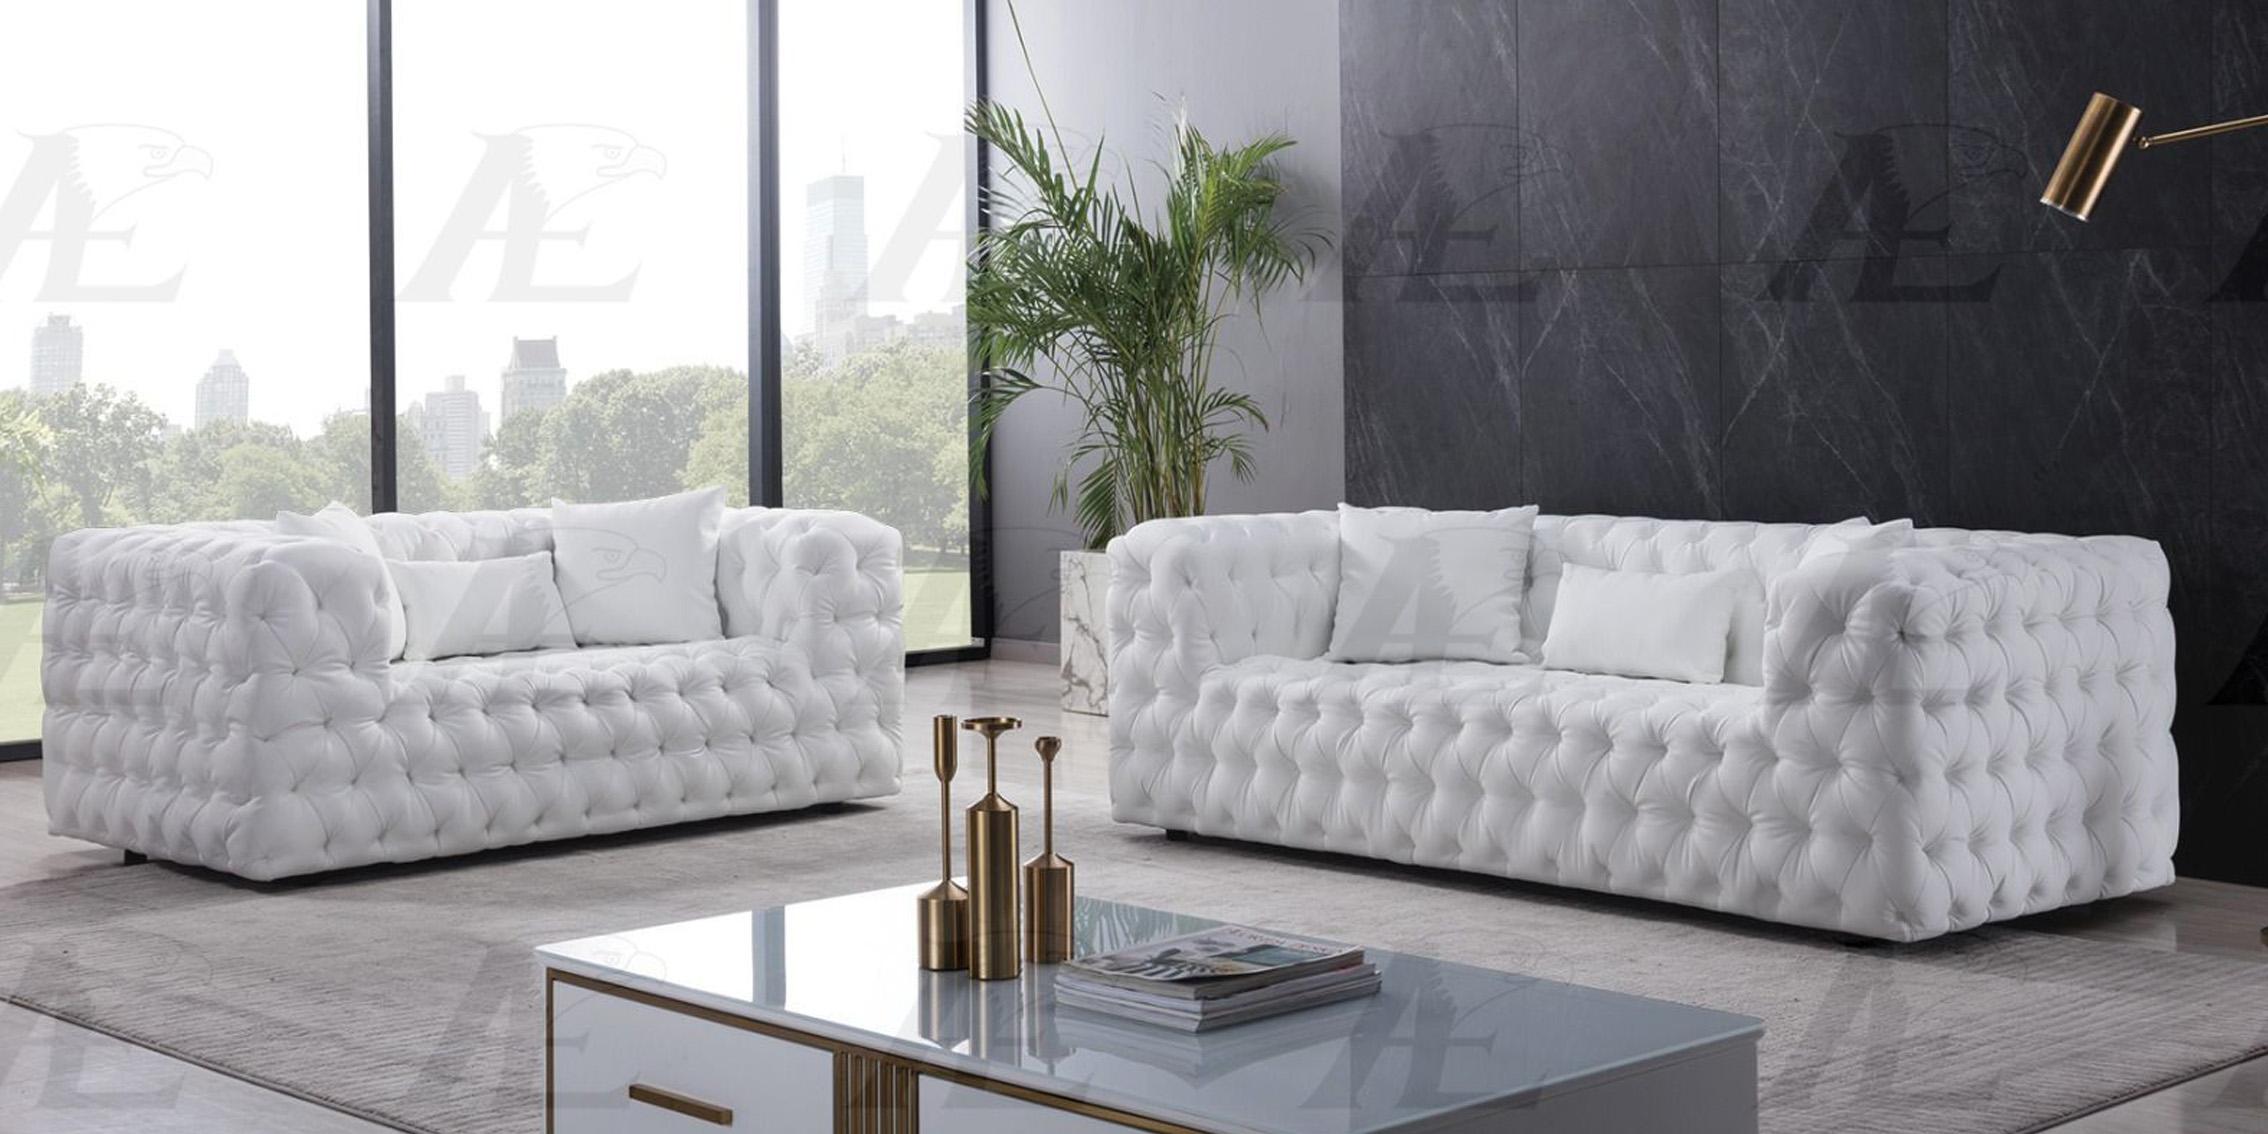 Contemporary, Modern Sofa Set AE-D821-W AE-D821-W-Set-2 in White Bonded Leather